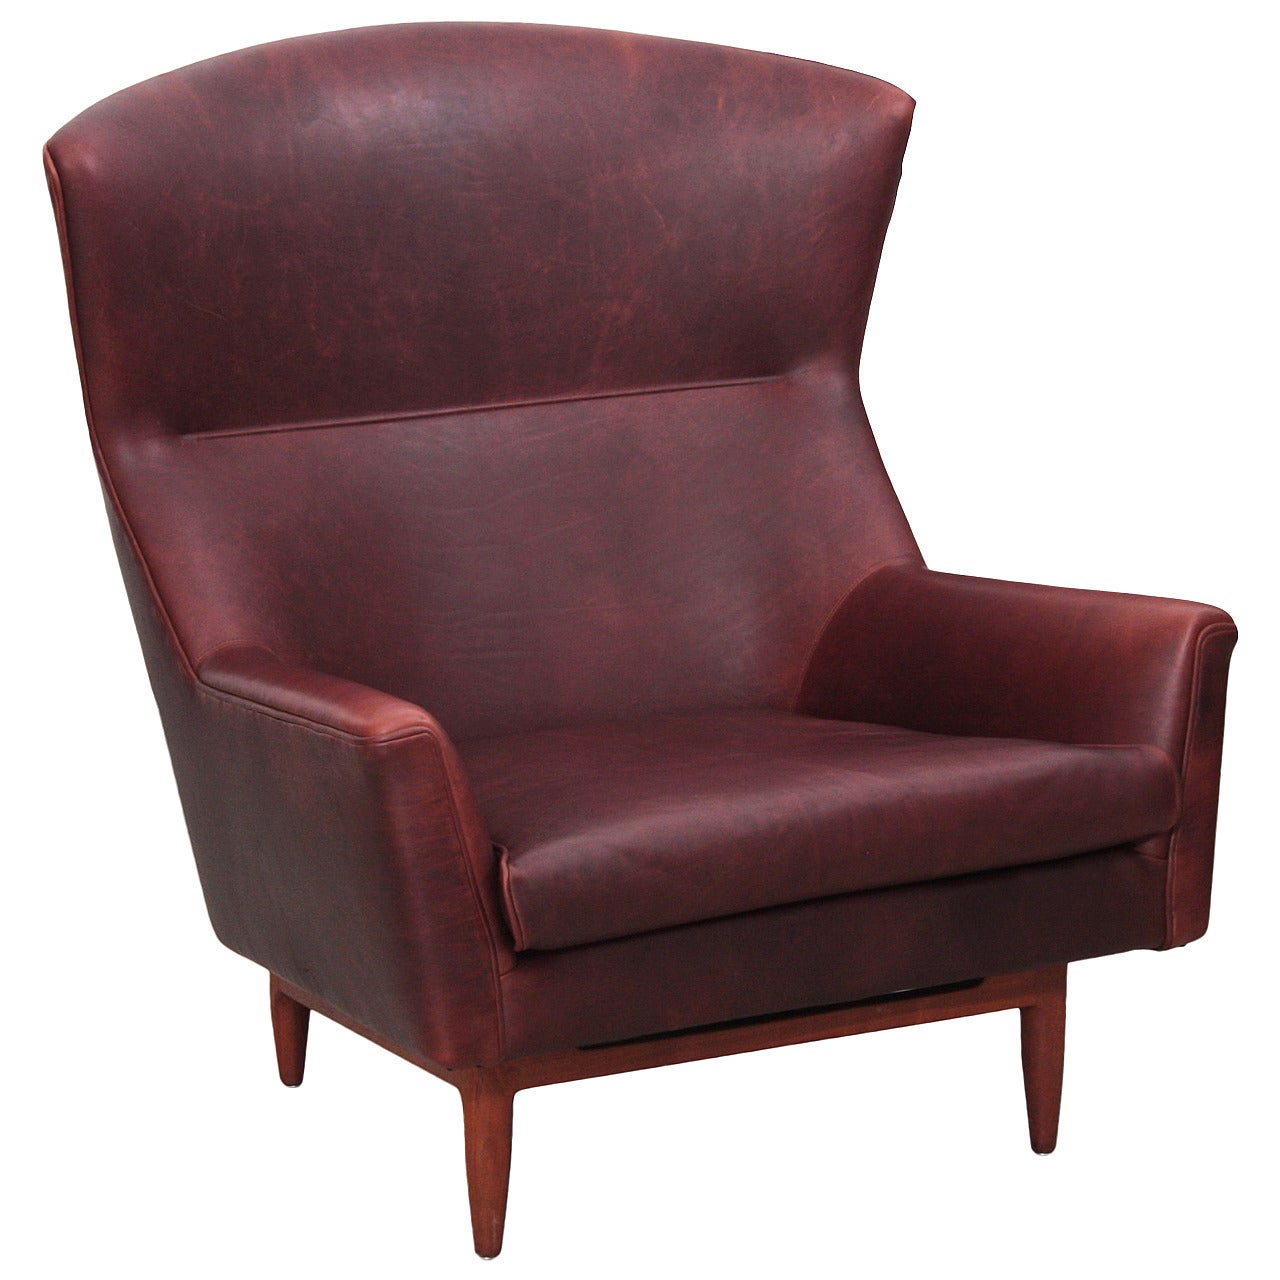 Rare Large Jens Risom Lounge Chair in Leather For Sale